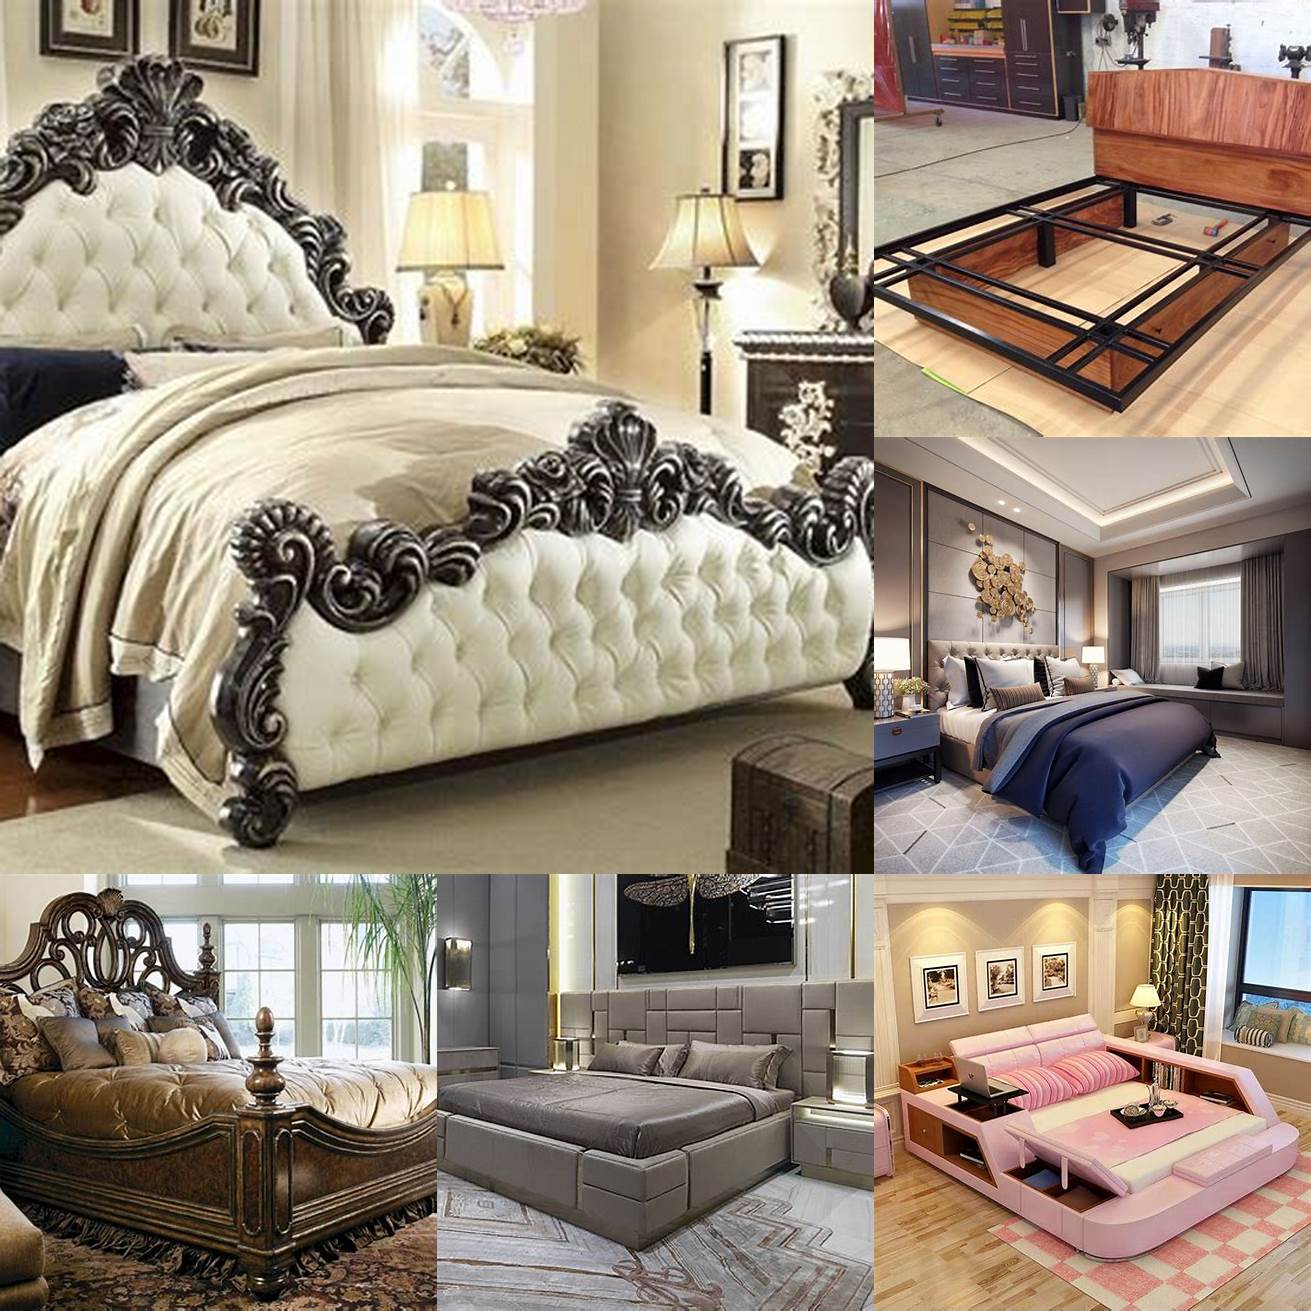 A custom bed frame can be a luxurious and comfortable addition to your bedroom